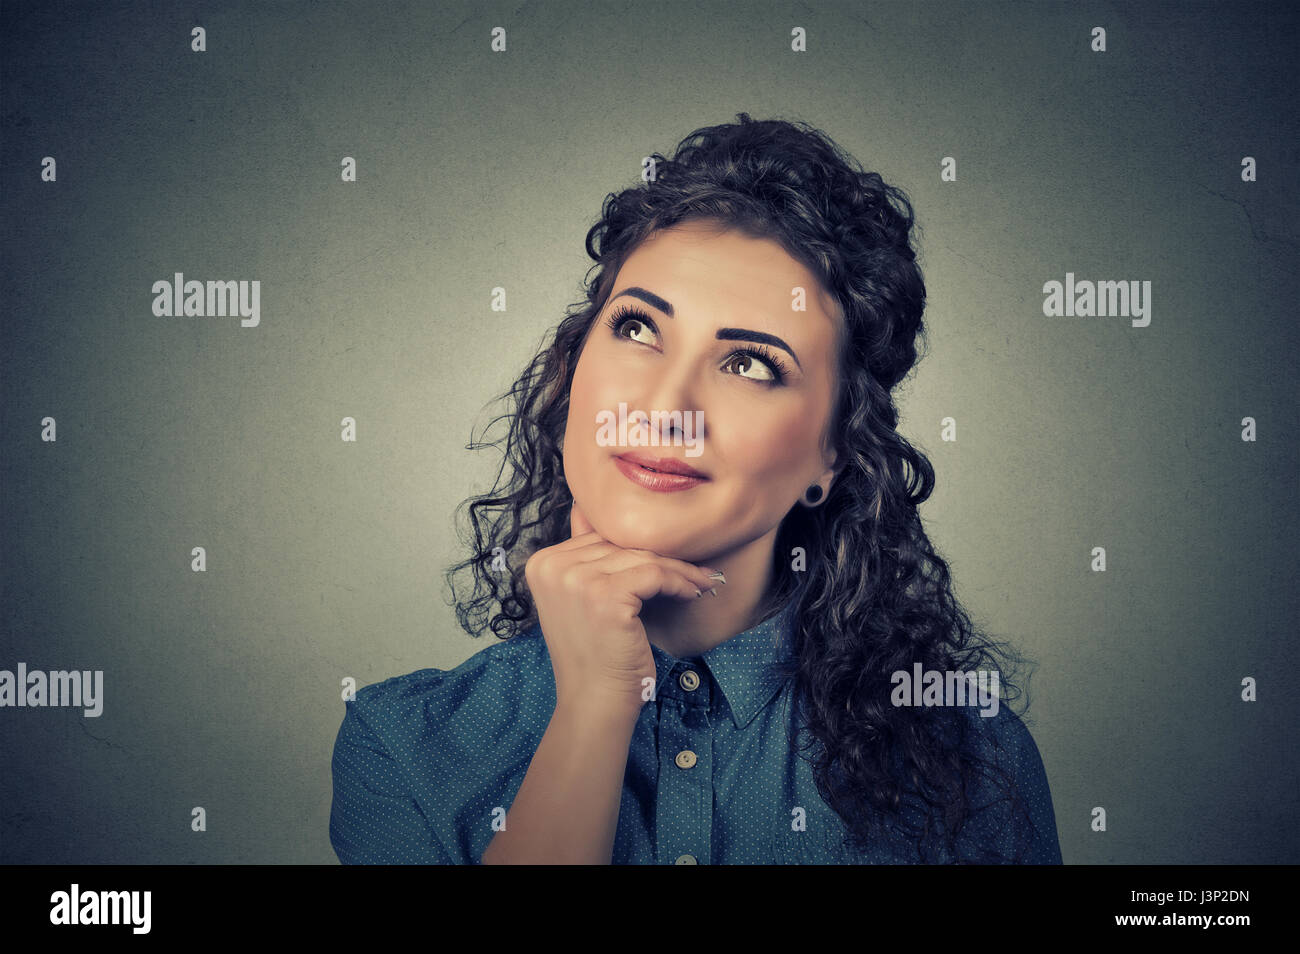 Portrait happy beautiful woman thinking looking up isolated on grey wall background with copy space. Human face expressions, emotions, feelings, body  Stock Photo